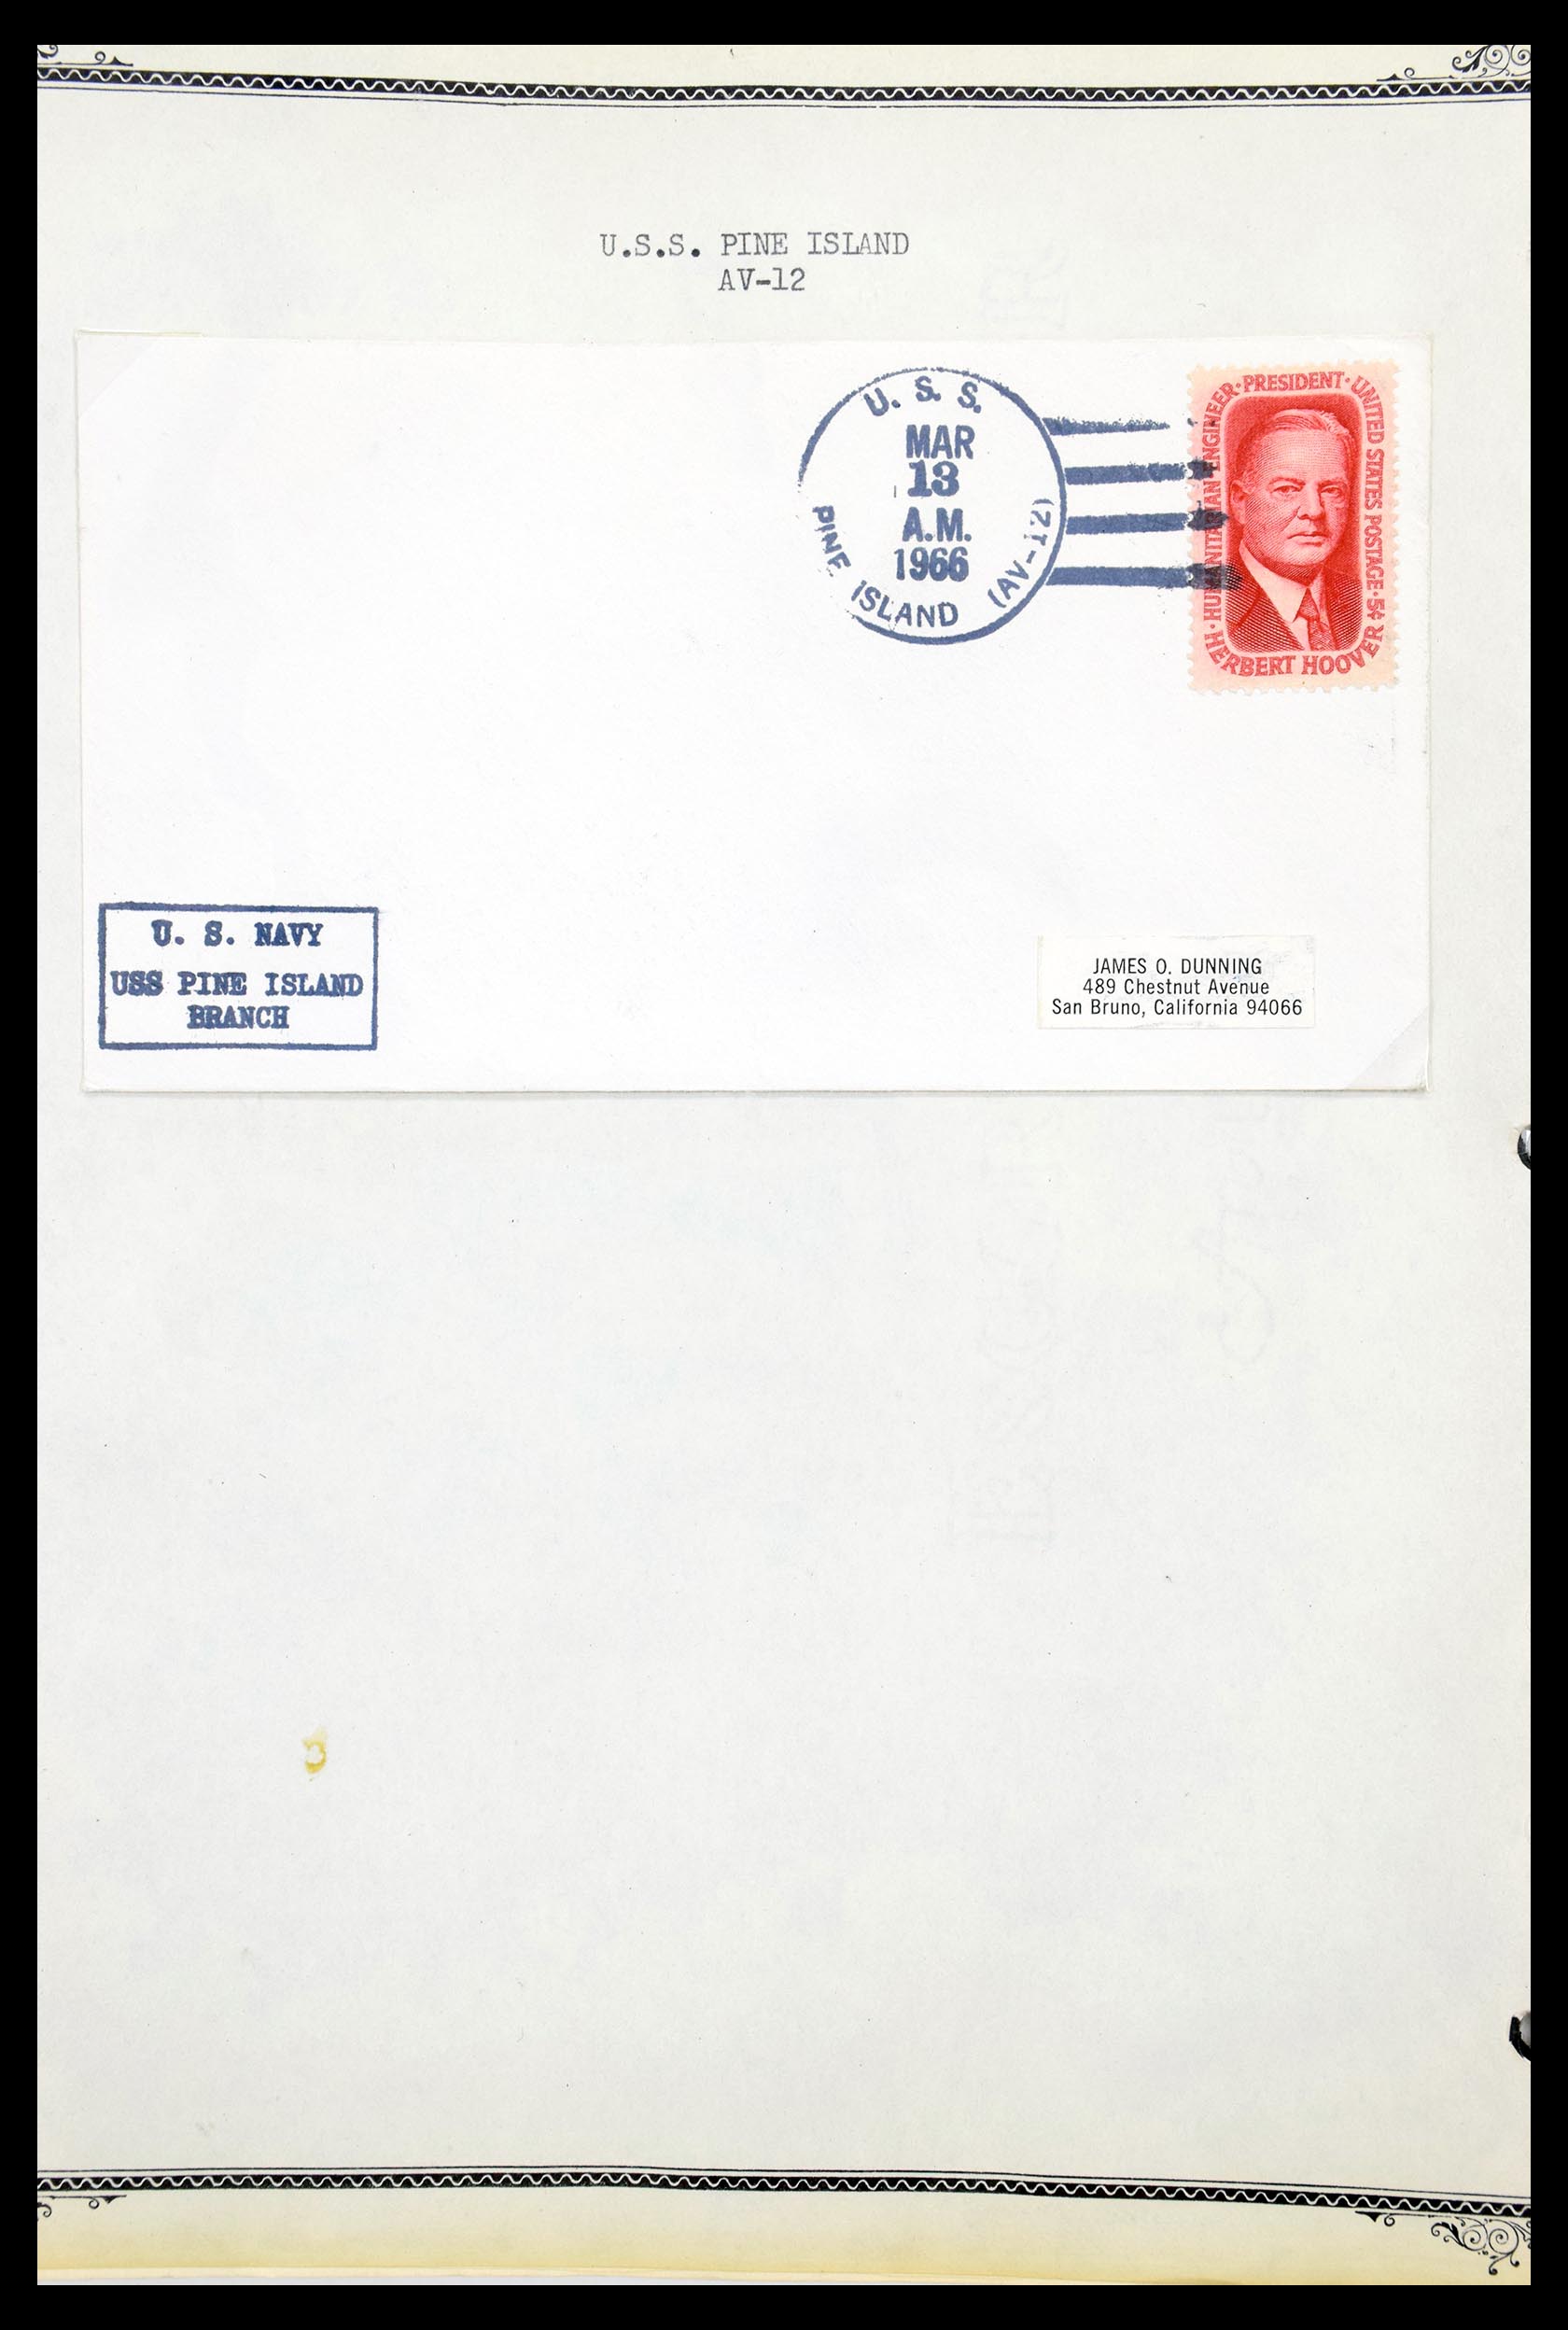 30341 084 - 30341 USA naval cover collection 1930-1970.